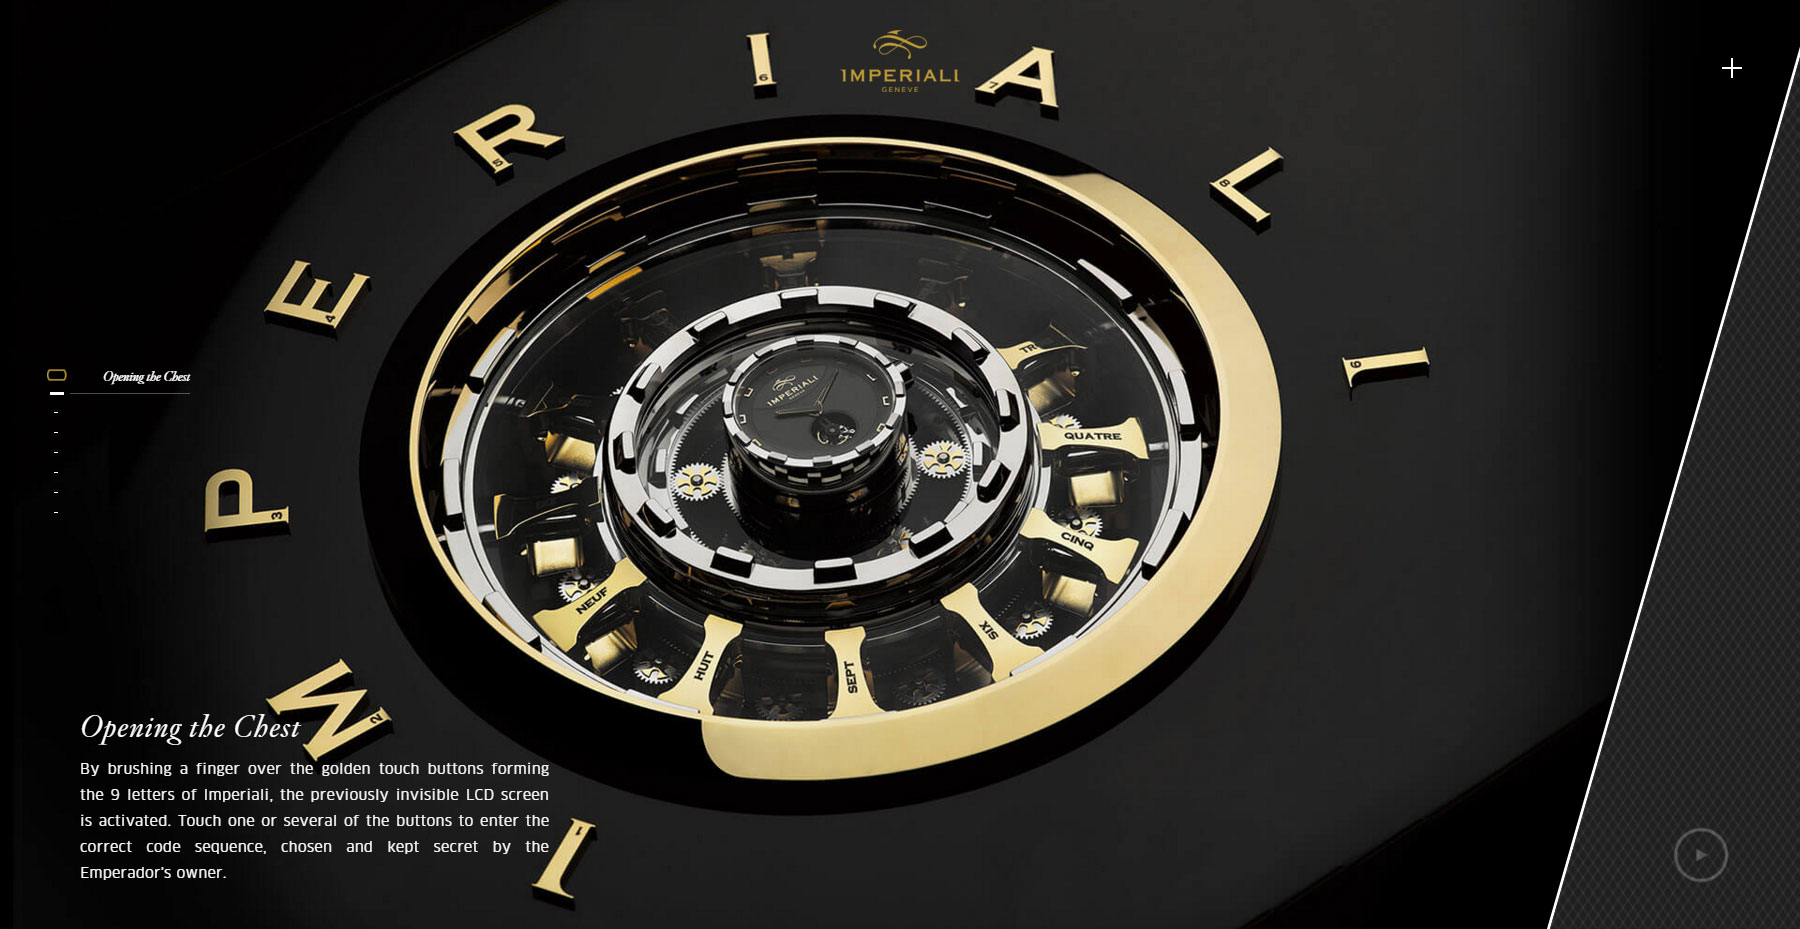 Imperiali Geneve - Website of the Day